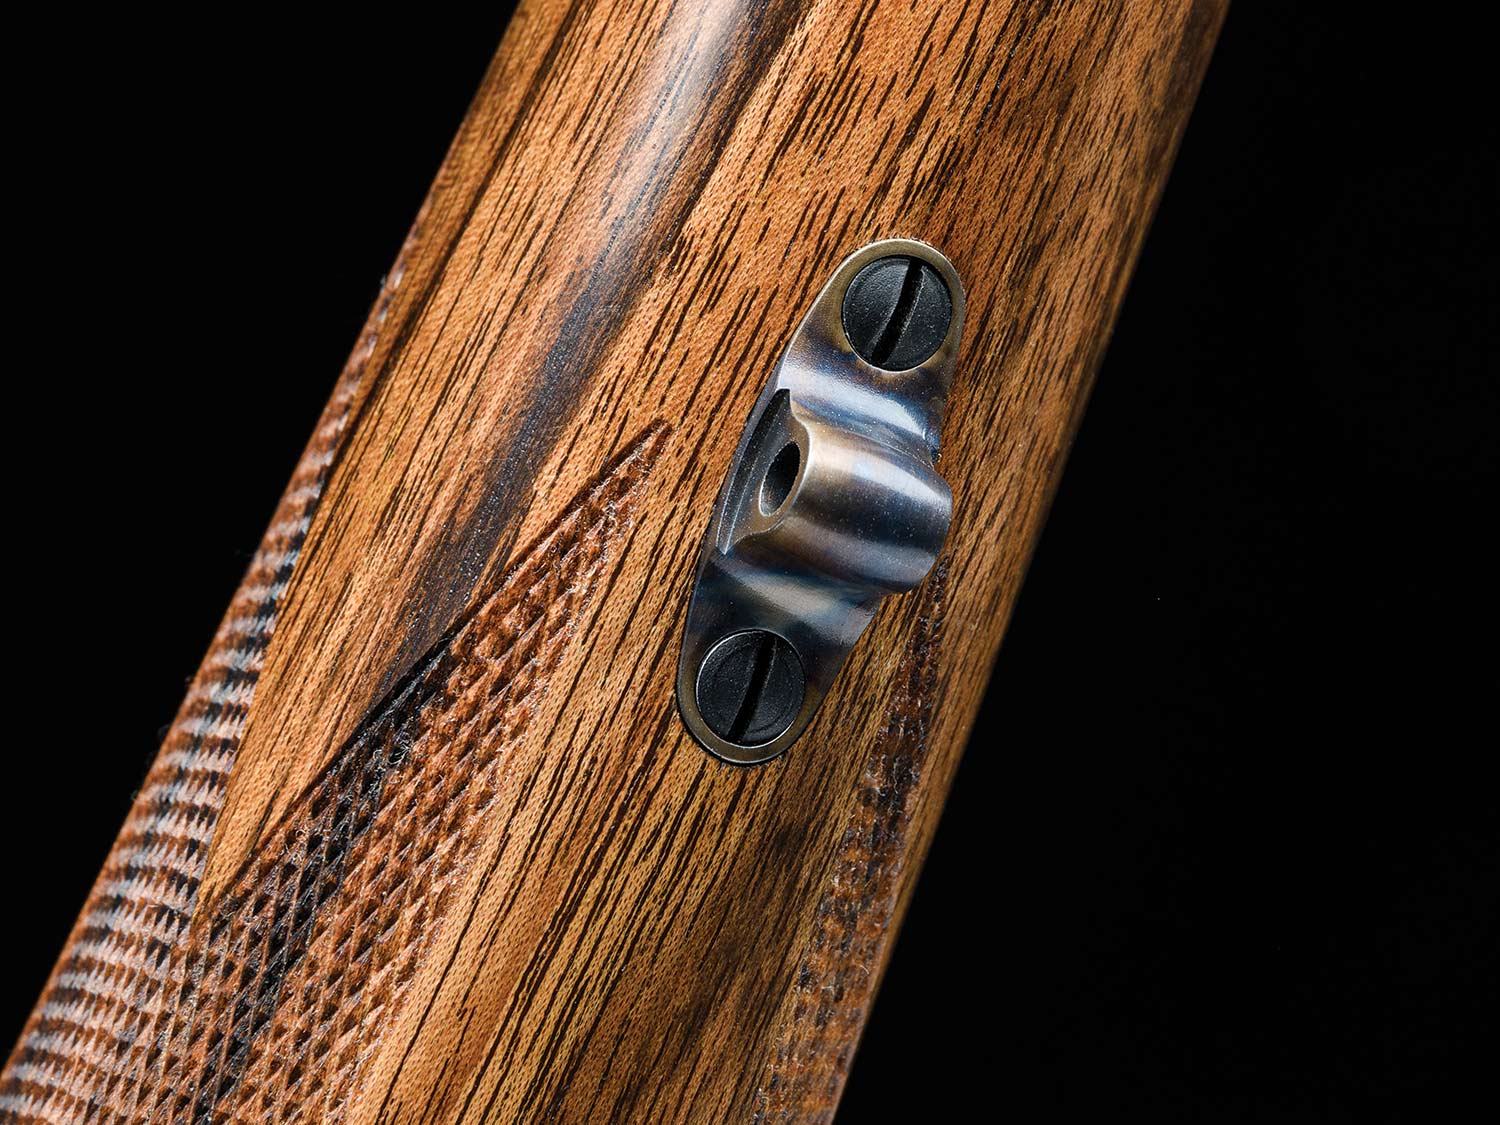 An inletted swivel stud on a rifle stock.